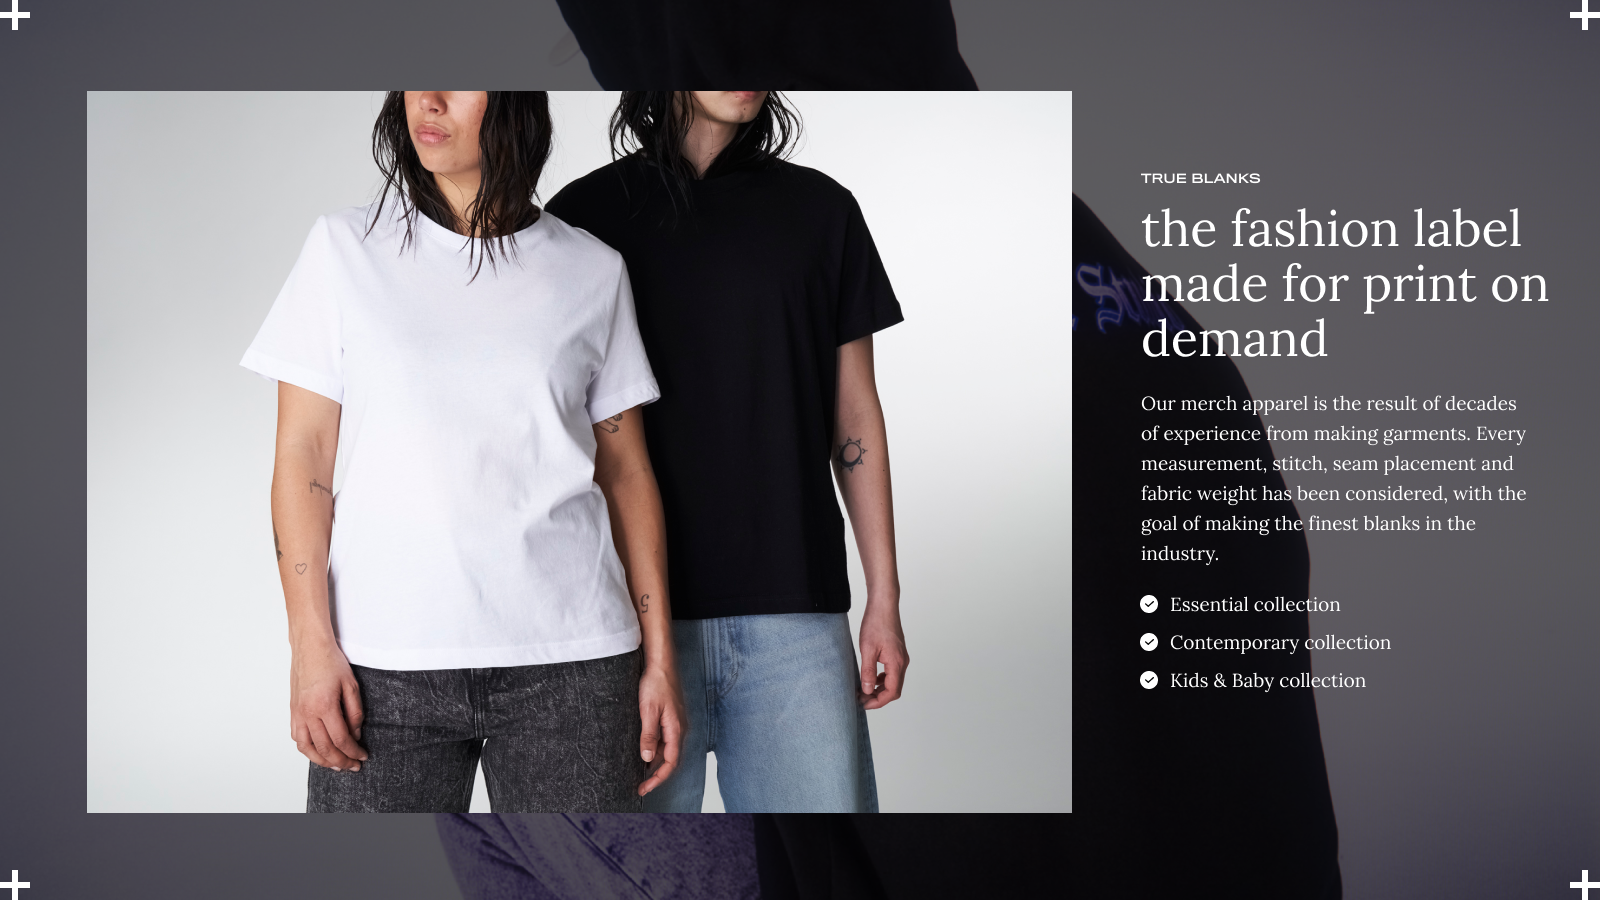 True Blanks - our fashion apparel label for print on demand